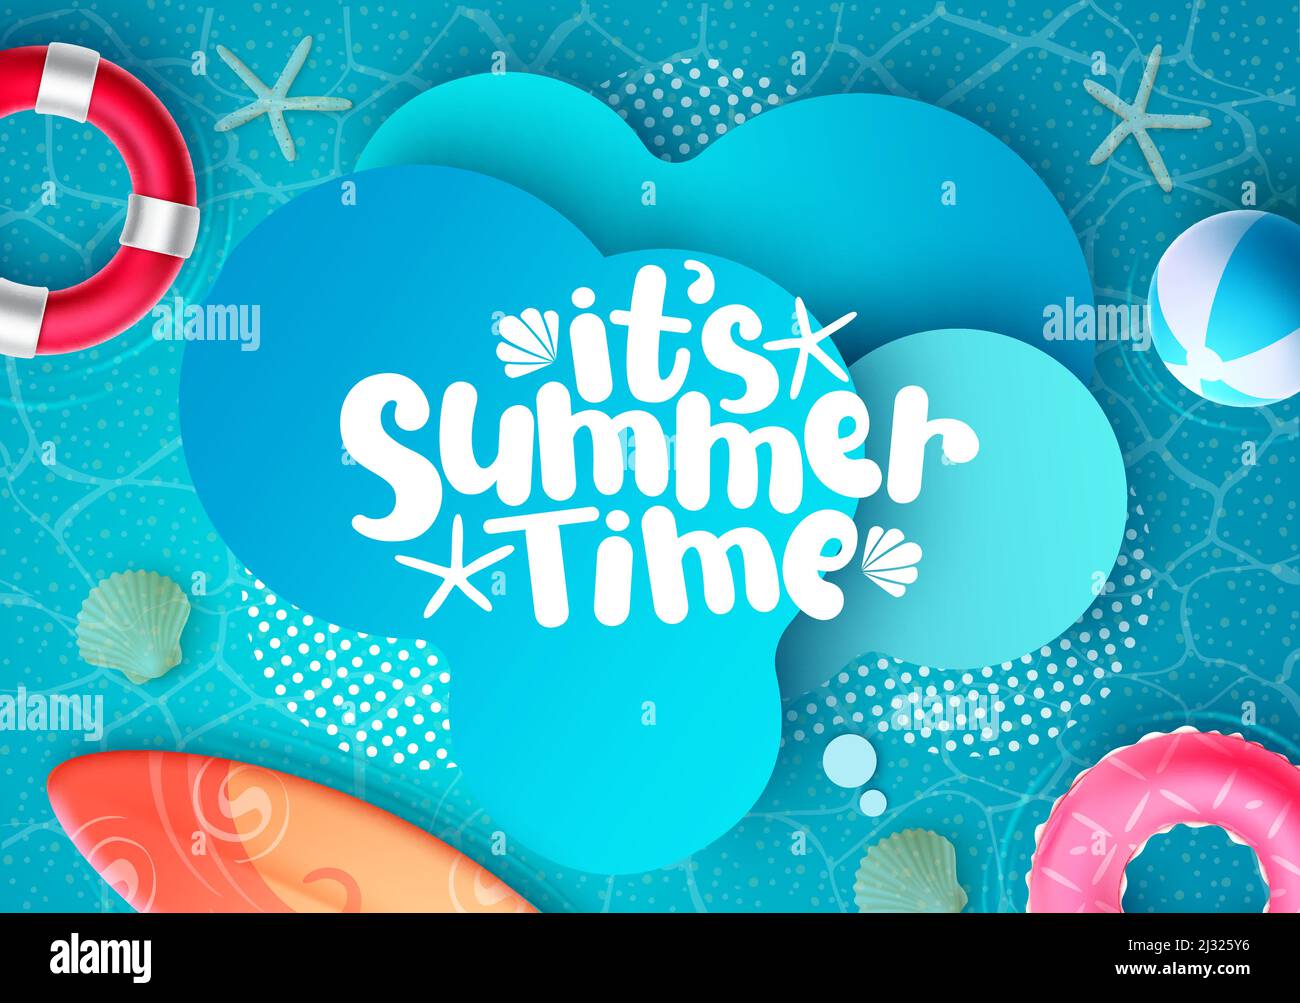 Summertime vector design. It's summer time text in abstract shape background with sea water patter and elements for relax tropical holiday season. Stock Vector